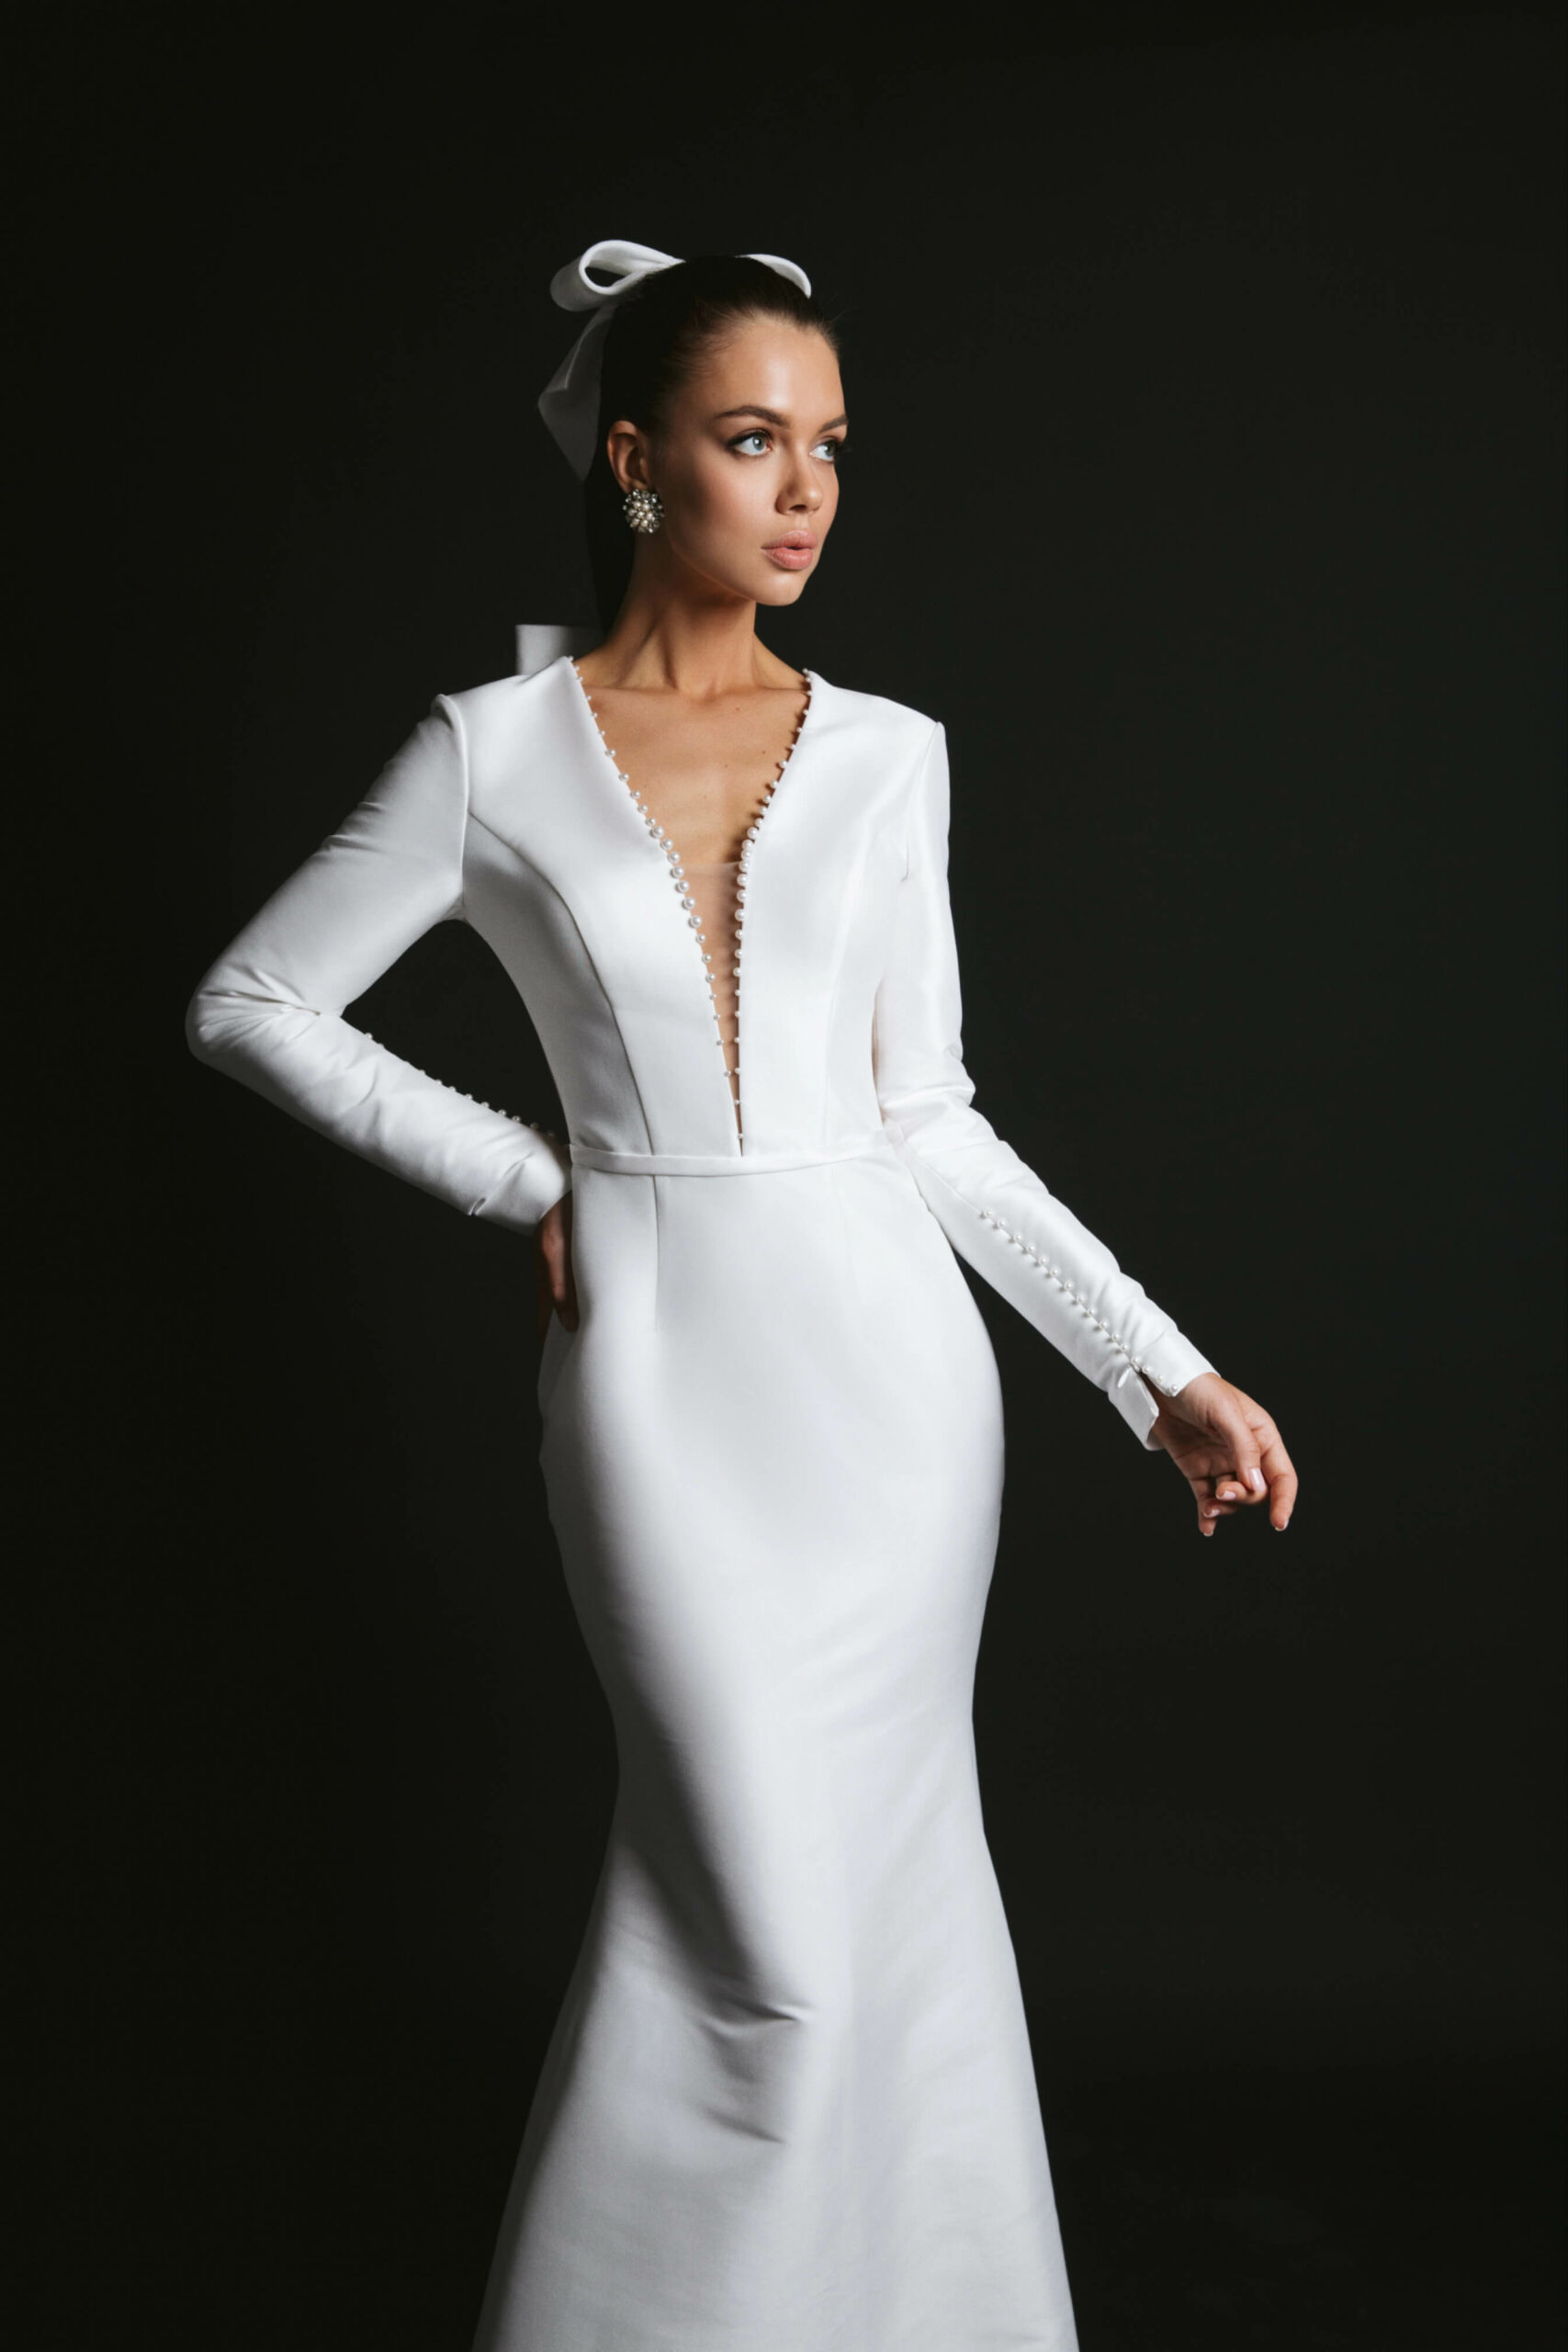 simple satin wedding dress with deepv-ncekline and open back by ange etoiles designer from dell'amore bridal, nz 4